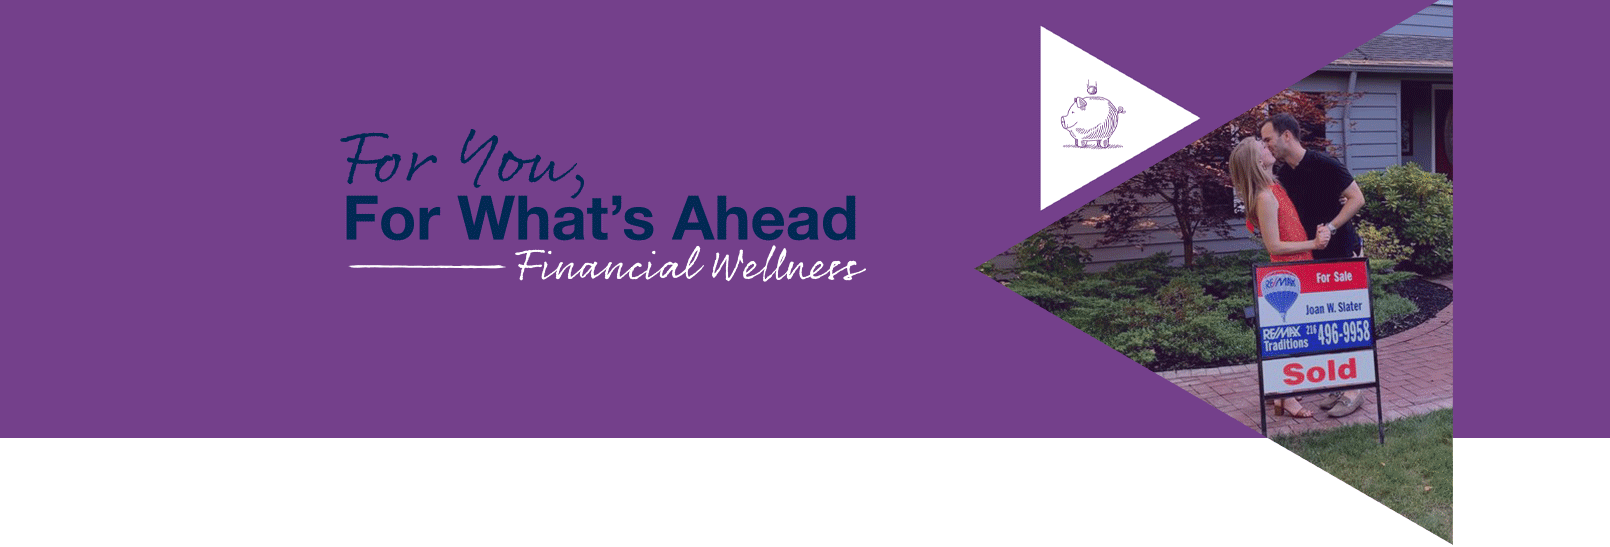 For You, For What's Ahead: Financial Wellness